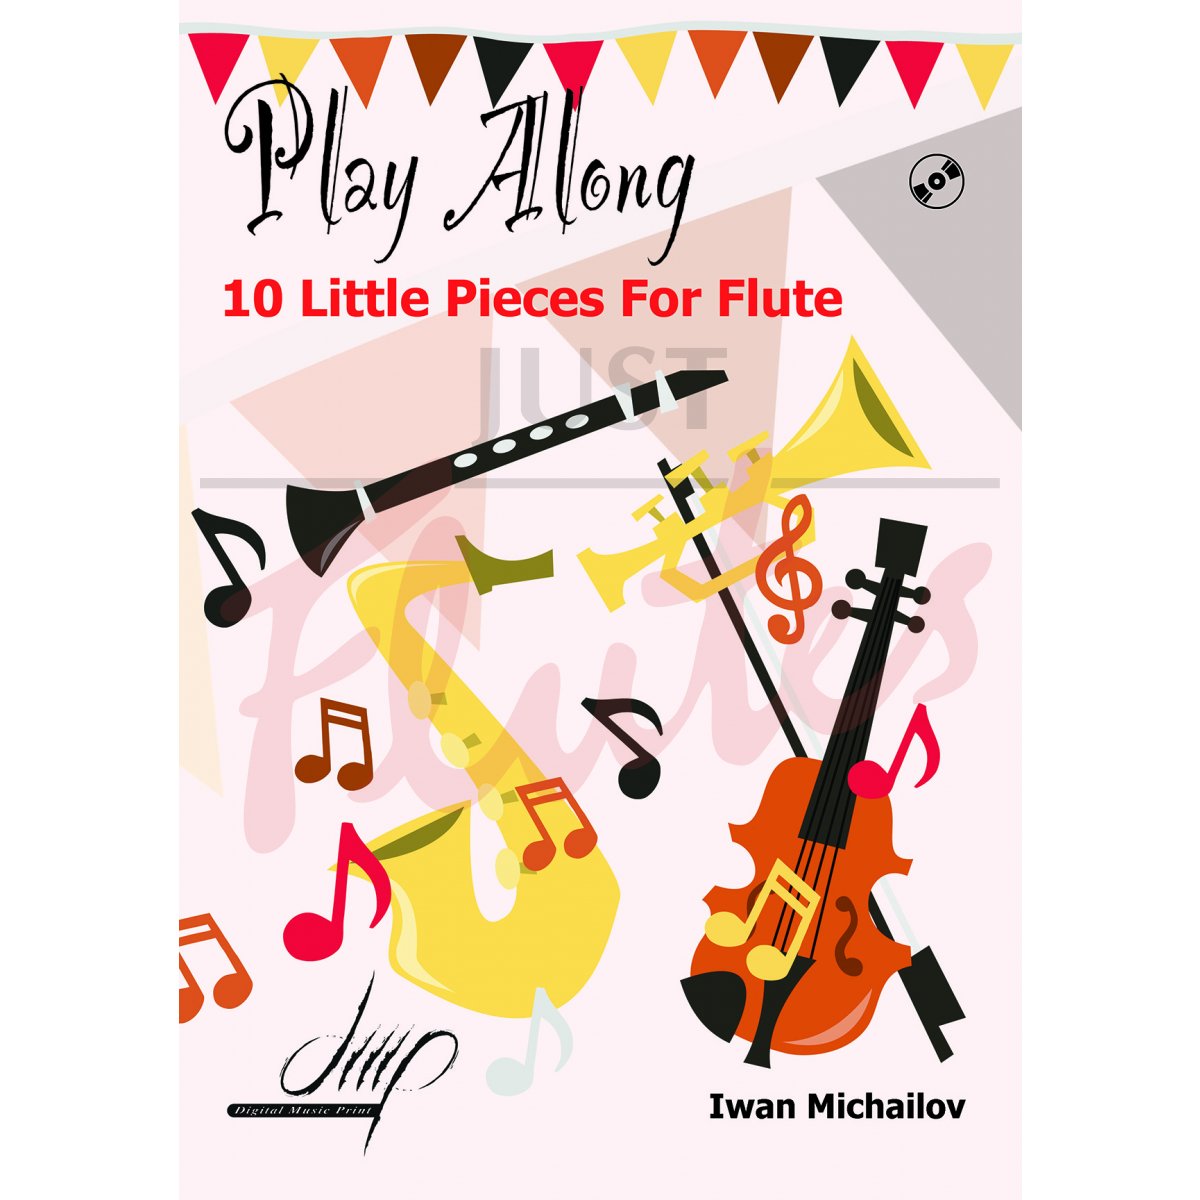 10 Little Pieces for flute (play along)